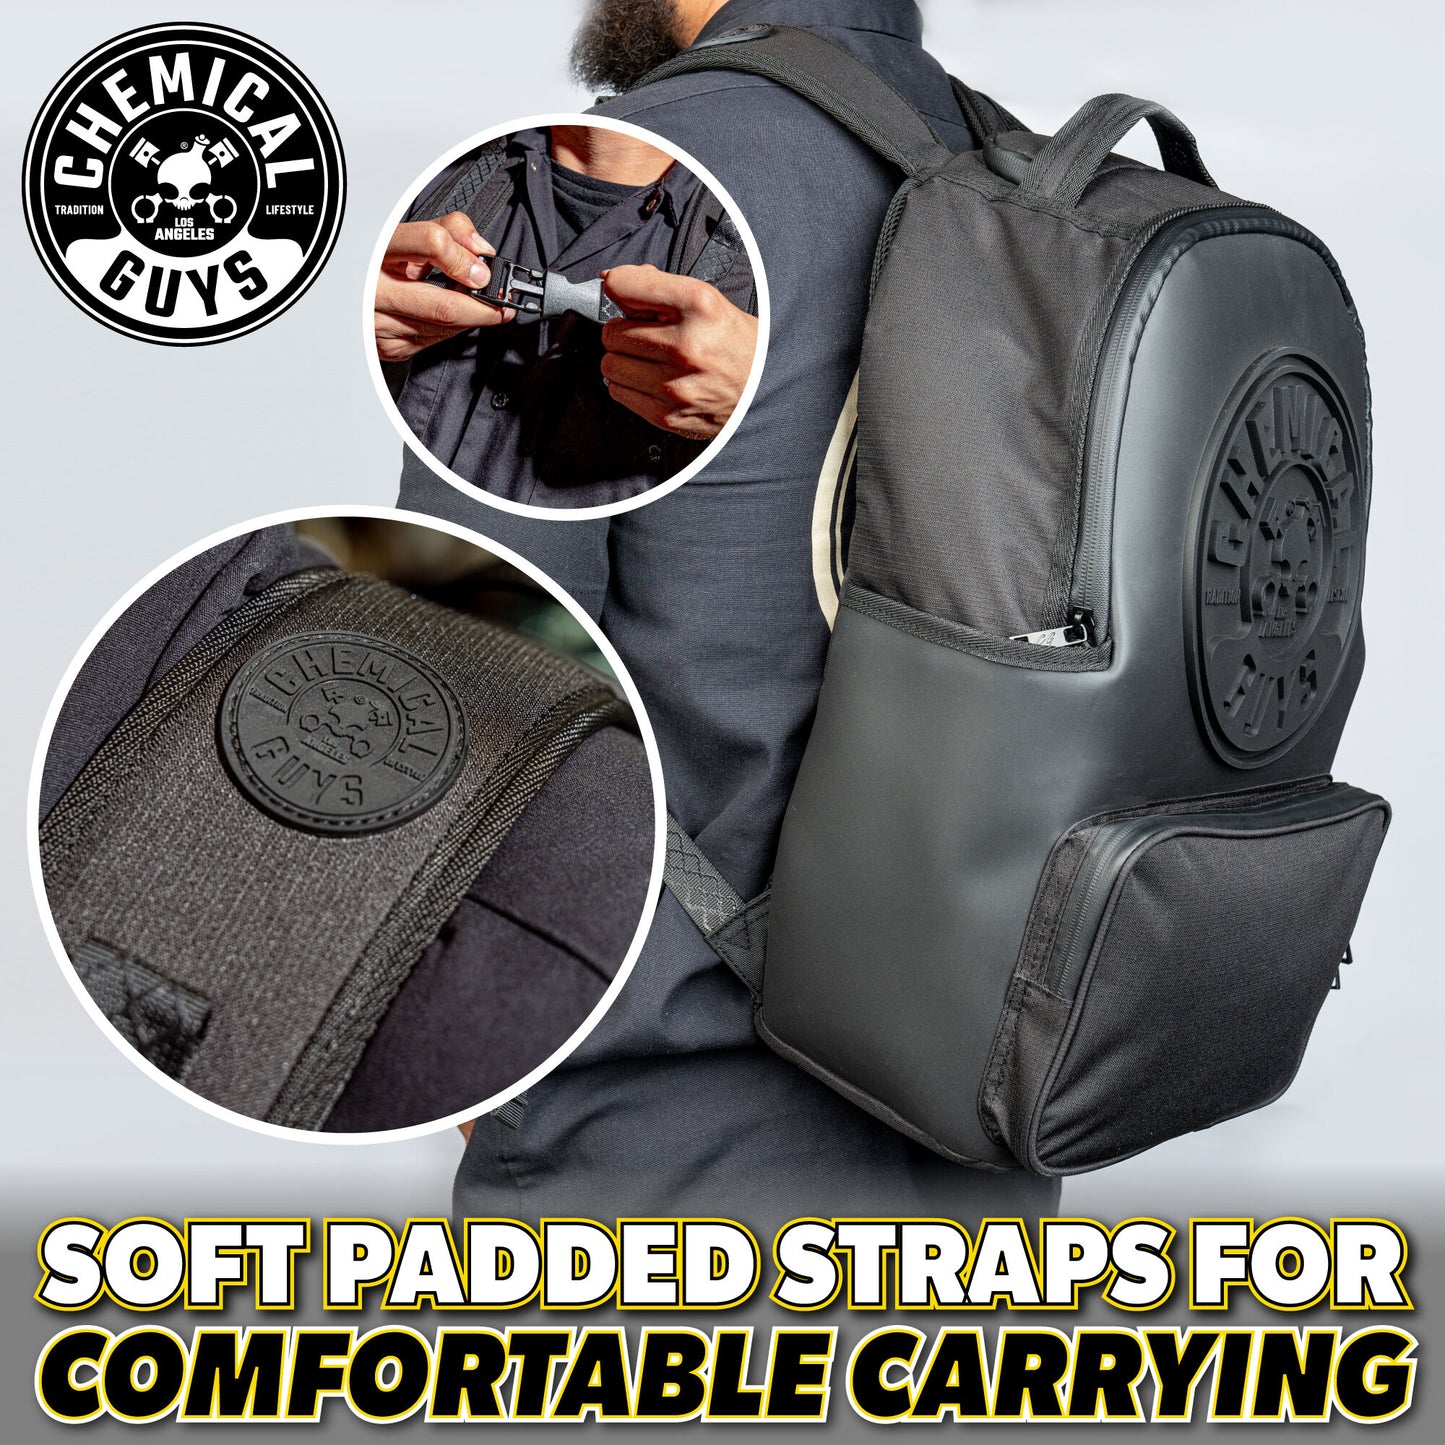 Legacy Stealth Multipurpose Backpack for Travel, Work, School, & Detailing with Laptop Sleeve